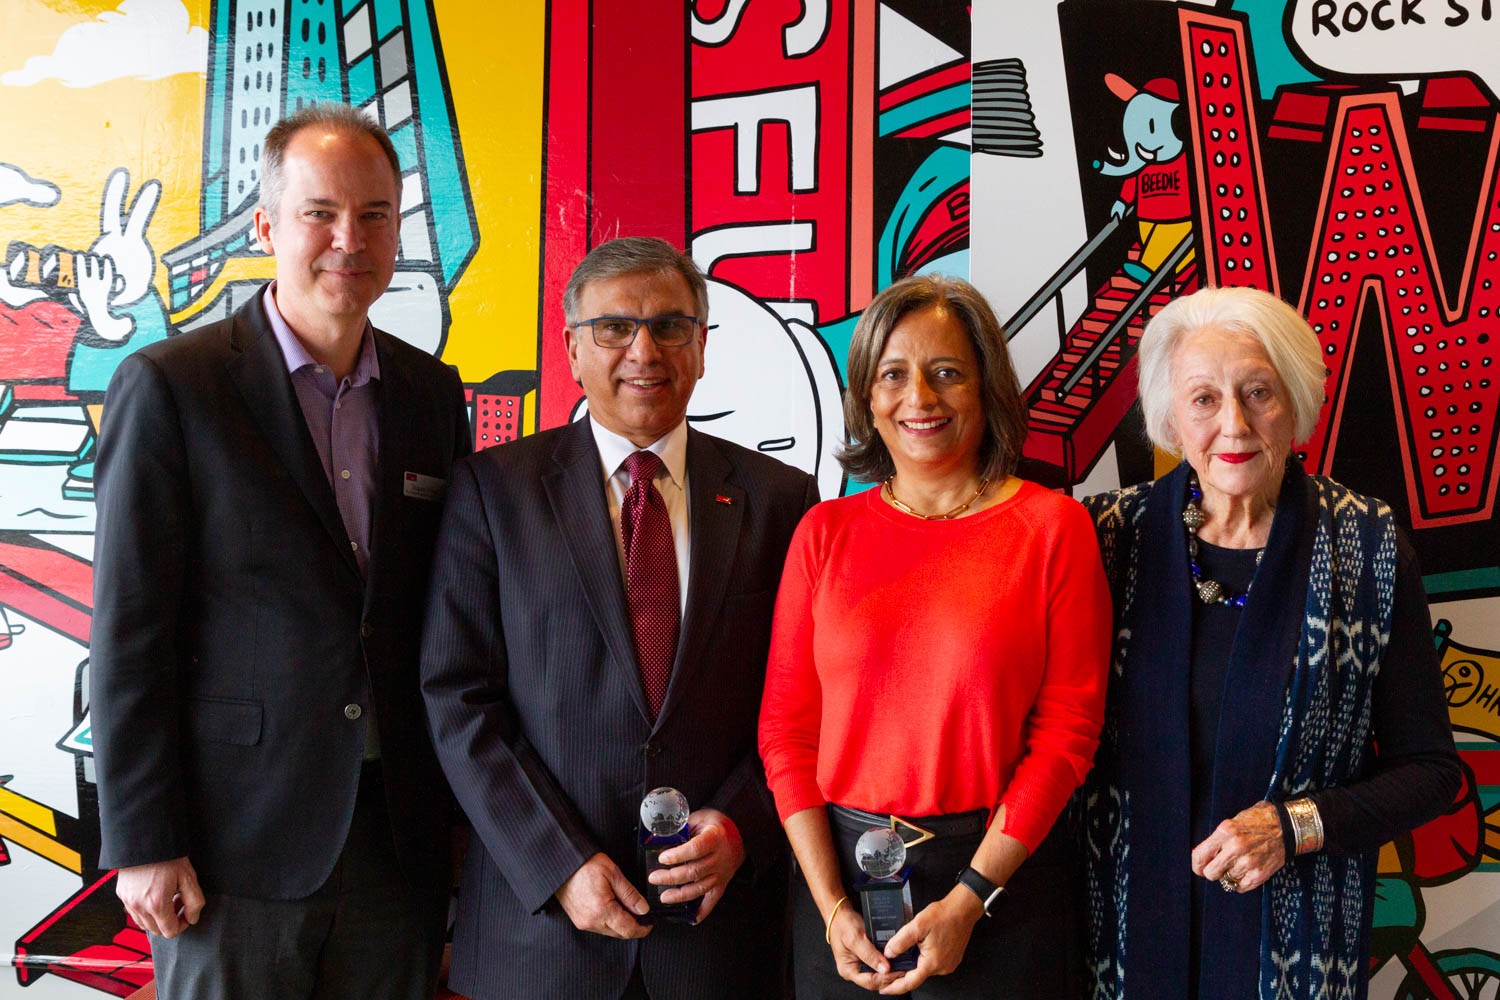 SFU’s Chris Dagg Award honorees share passion for work to address ...